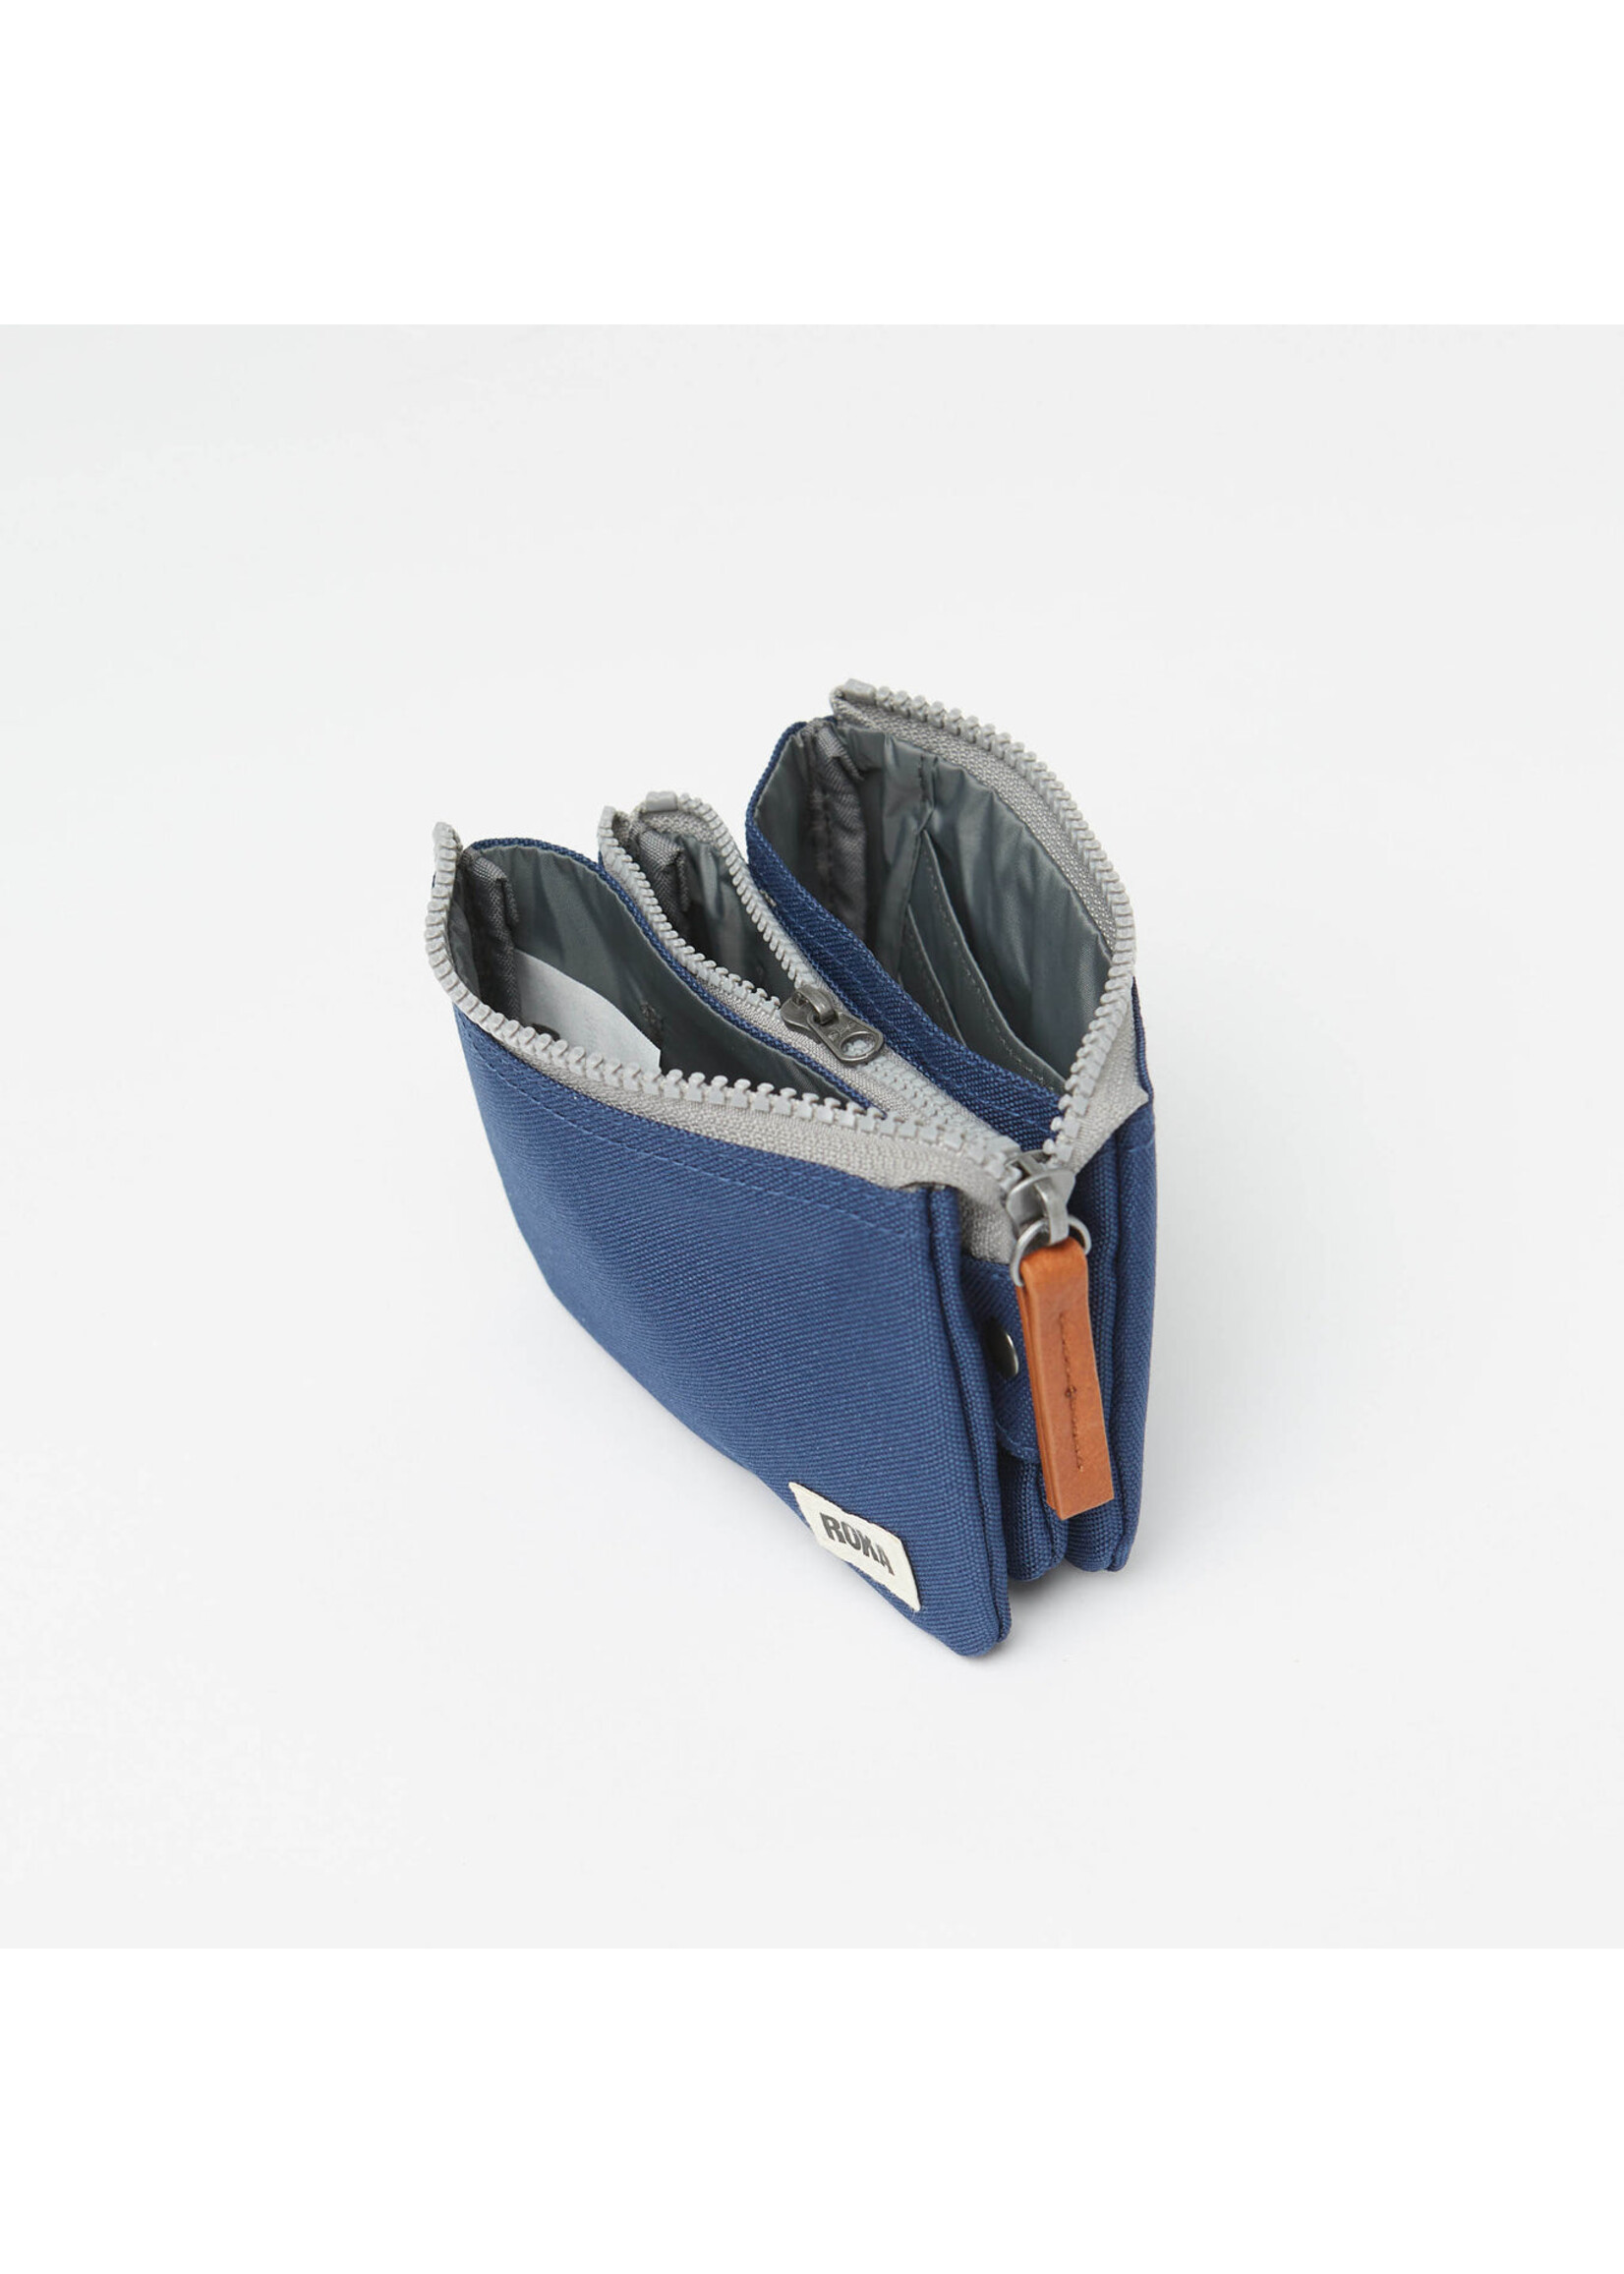 ROKA London Carnaby Wallet Sustainable Canvas Mineral